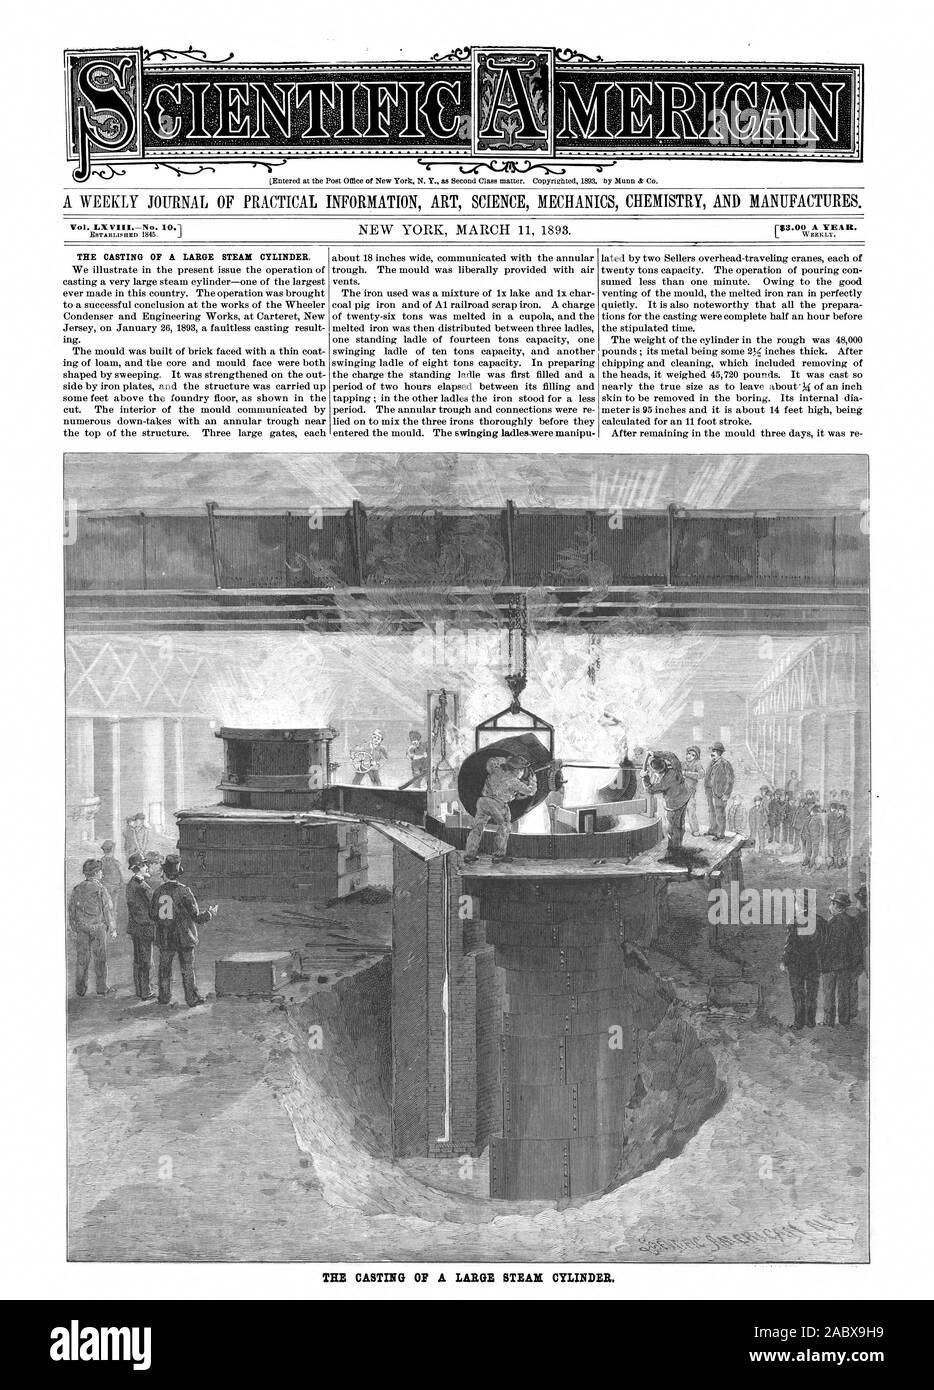 Entered at the Post Office of New York N. Y. as Second Class matter. Copyrighted 1893. by Munn & Co. Vol. LXVI1INo. 10. $3.00 A YEAR. THE CASTING OF A LARGE STEAM CYLINDER. THE CASTING OP A LARGE STEAM CYLINDER., scientific american, 1893-03-11 Stock Photo